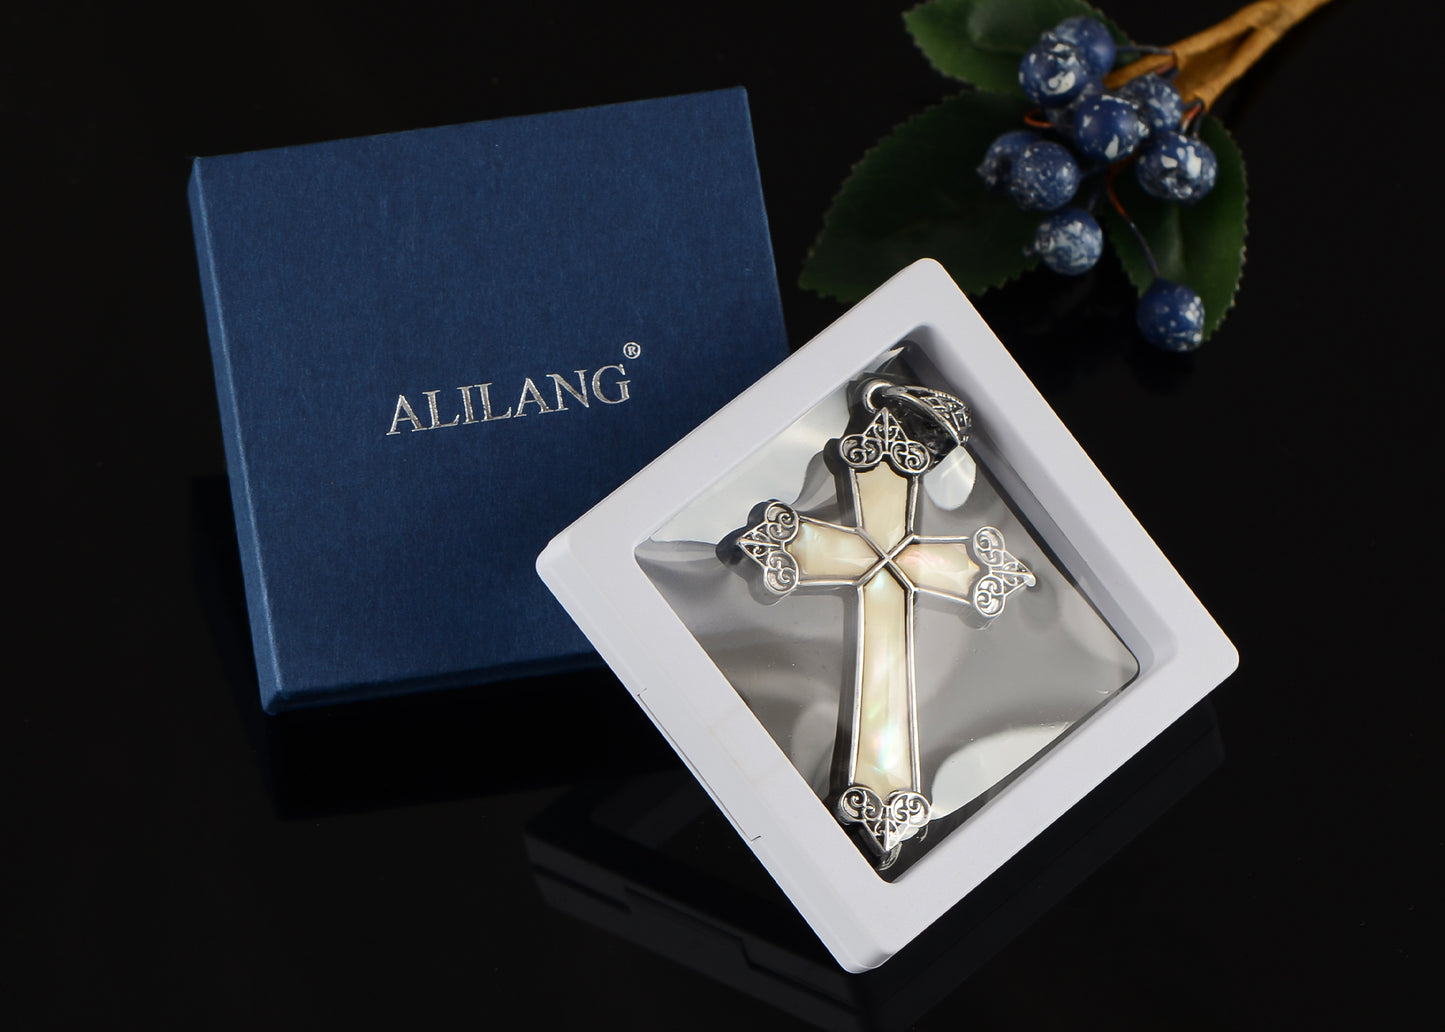 Alilang Vintage Inspired Silvery Tone Abalone Shell Religious Cross Pendant Necklace